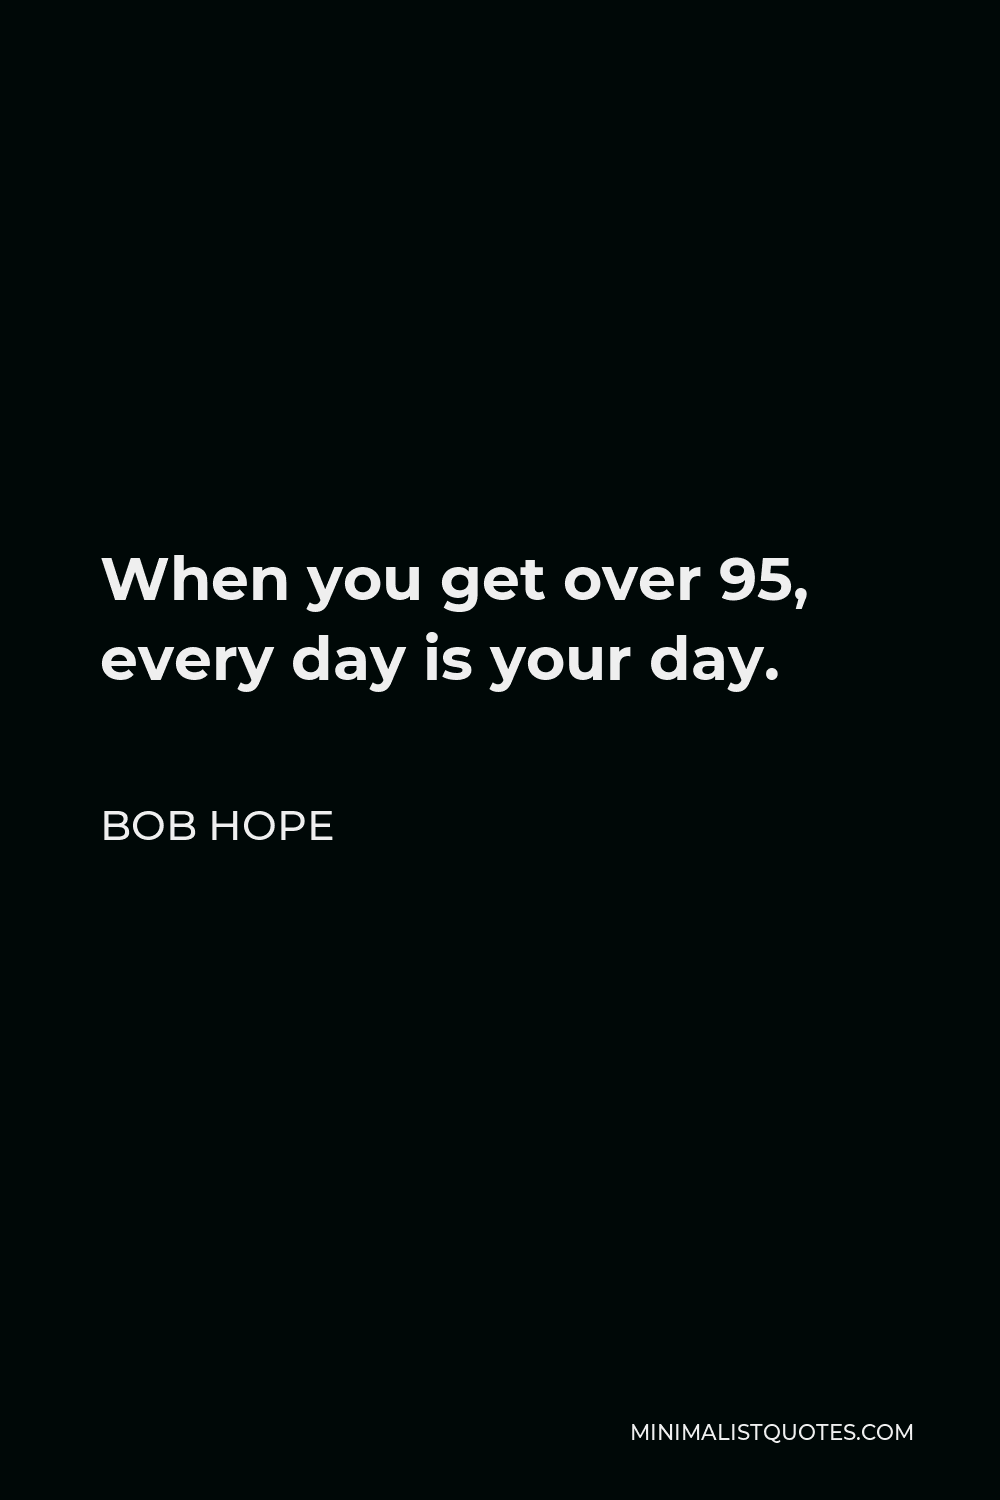 Bob Hope Quote - When you get over 95, every day is your day.